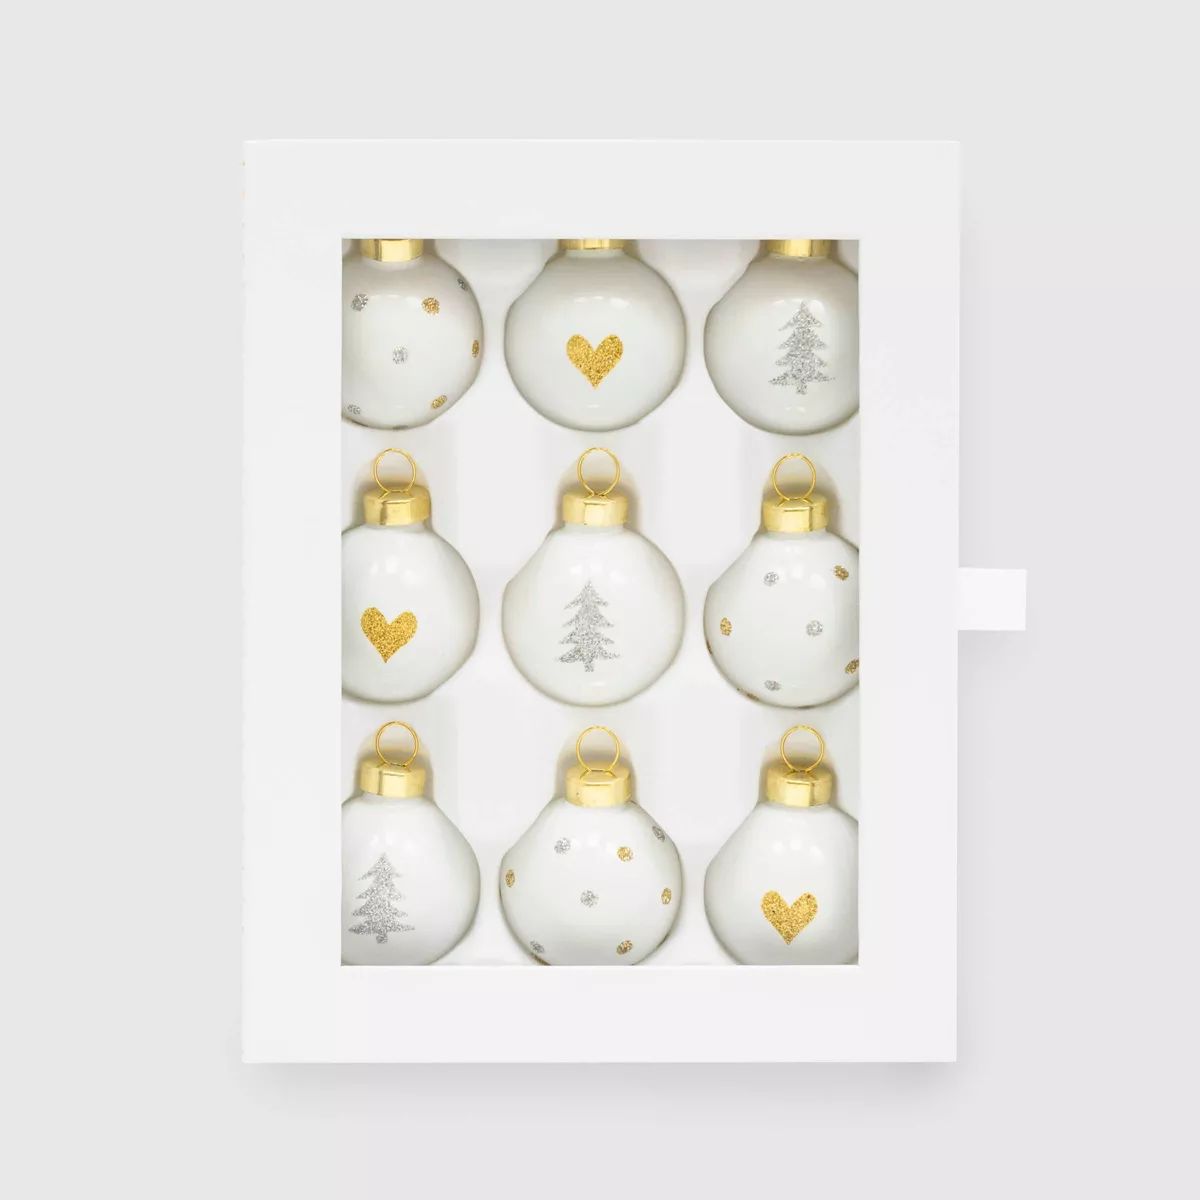 Glittered Glass Christmas Tree Ornament Set 9pc White/Gold/Silver - Sugar Paper™ + Target | Target